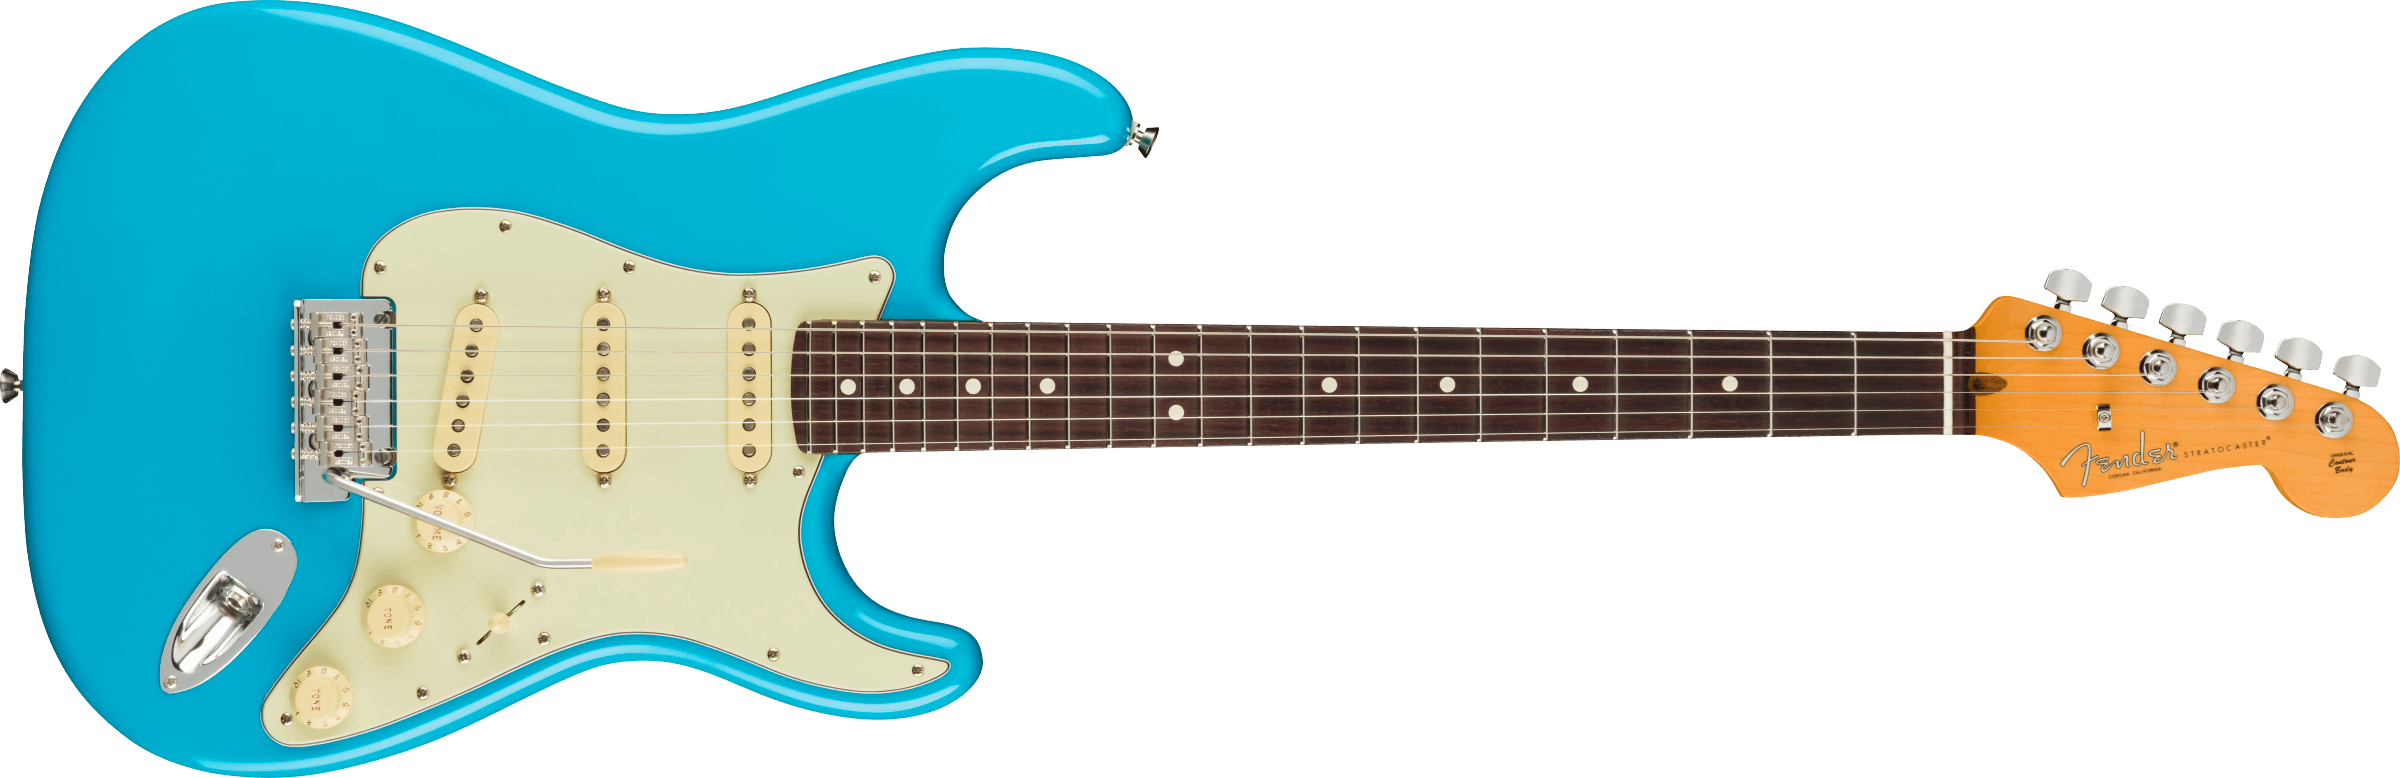 Fender American Professional II Stratocaster Rosewood Fingerboard Miami Blue F-0113900719 SERIAL NUMBER US210061754 - 7.4 LBS